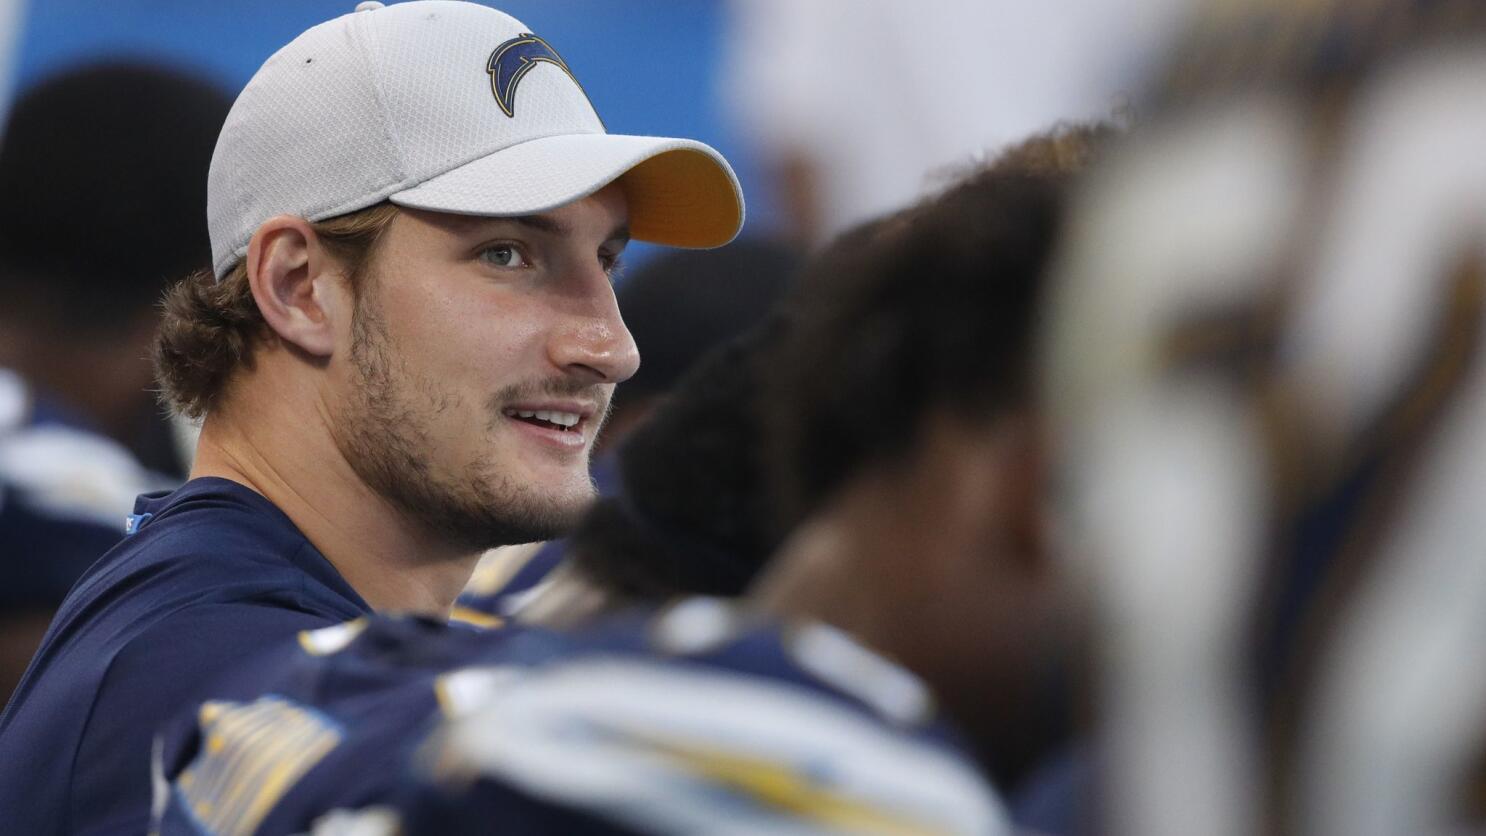 Chargers defensive end Joey Bosa will make his 2018 debut against